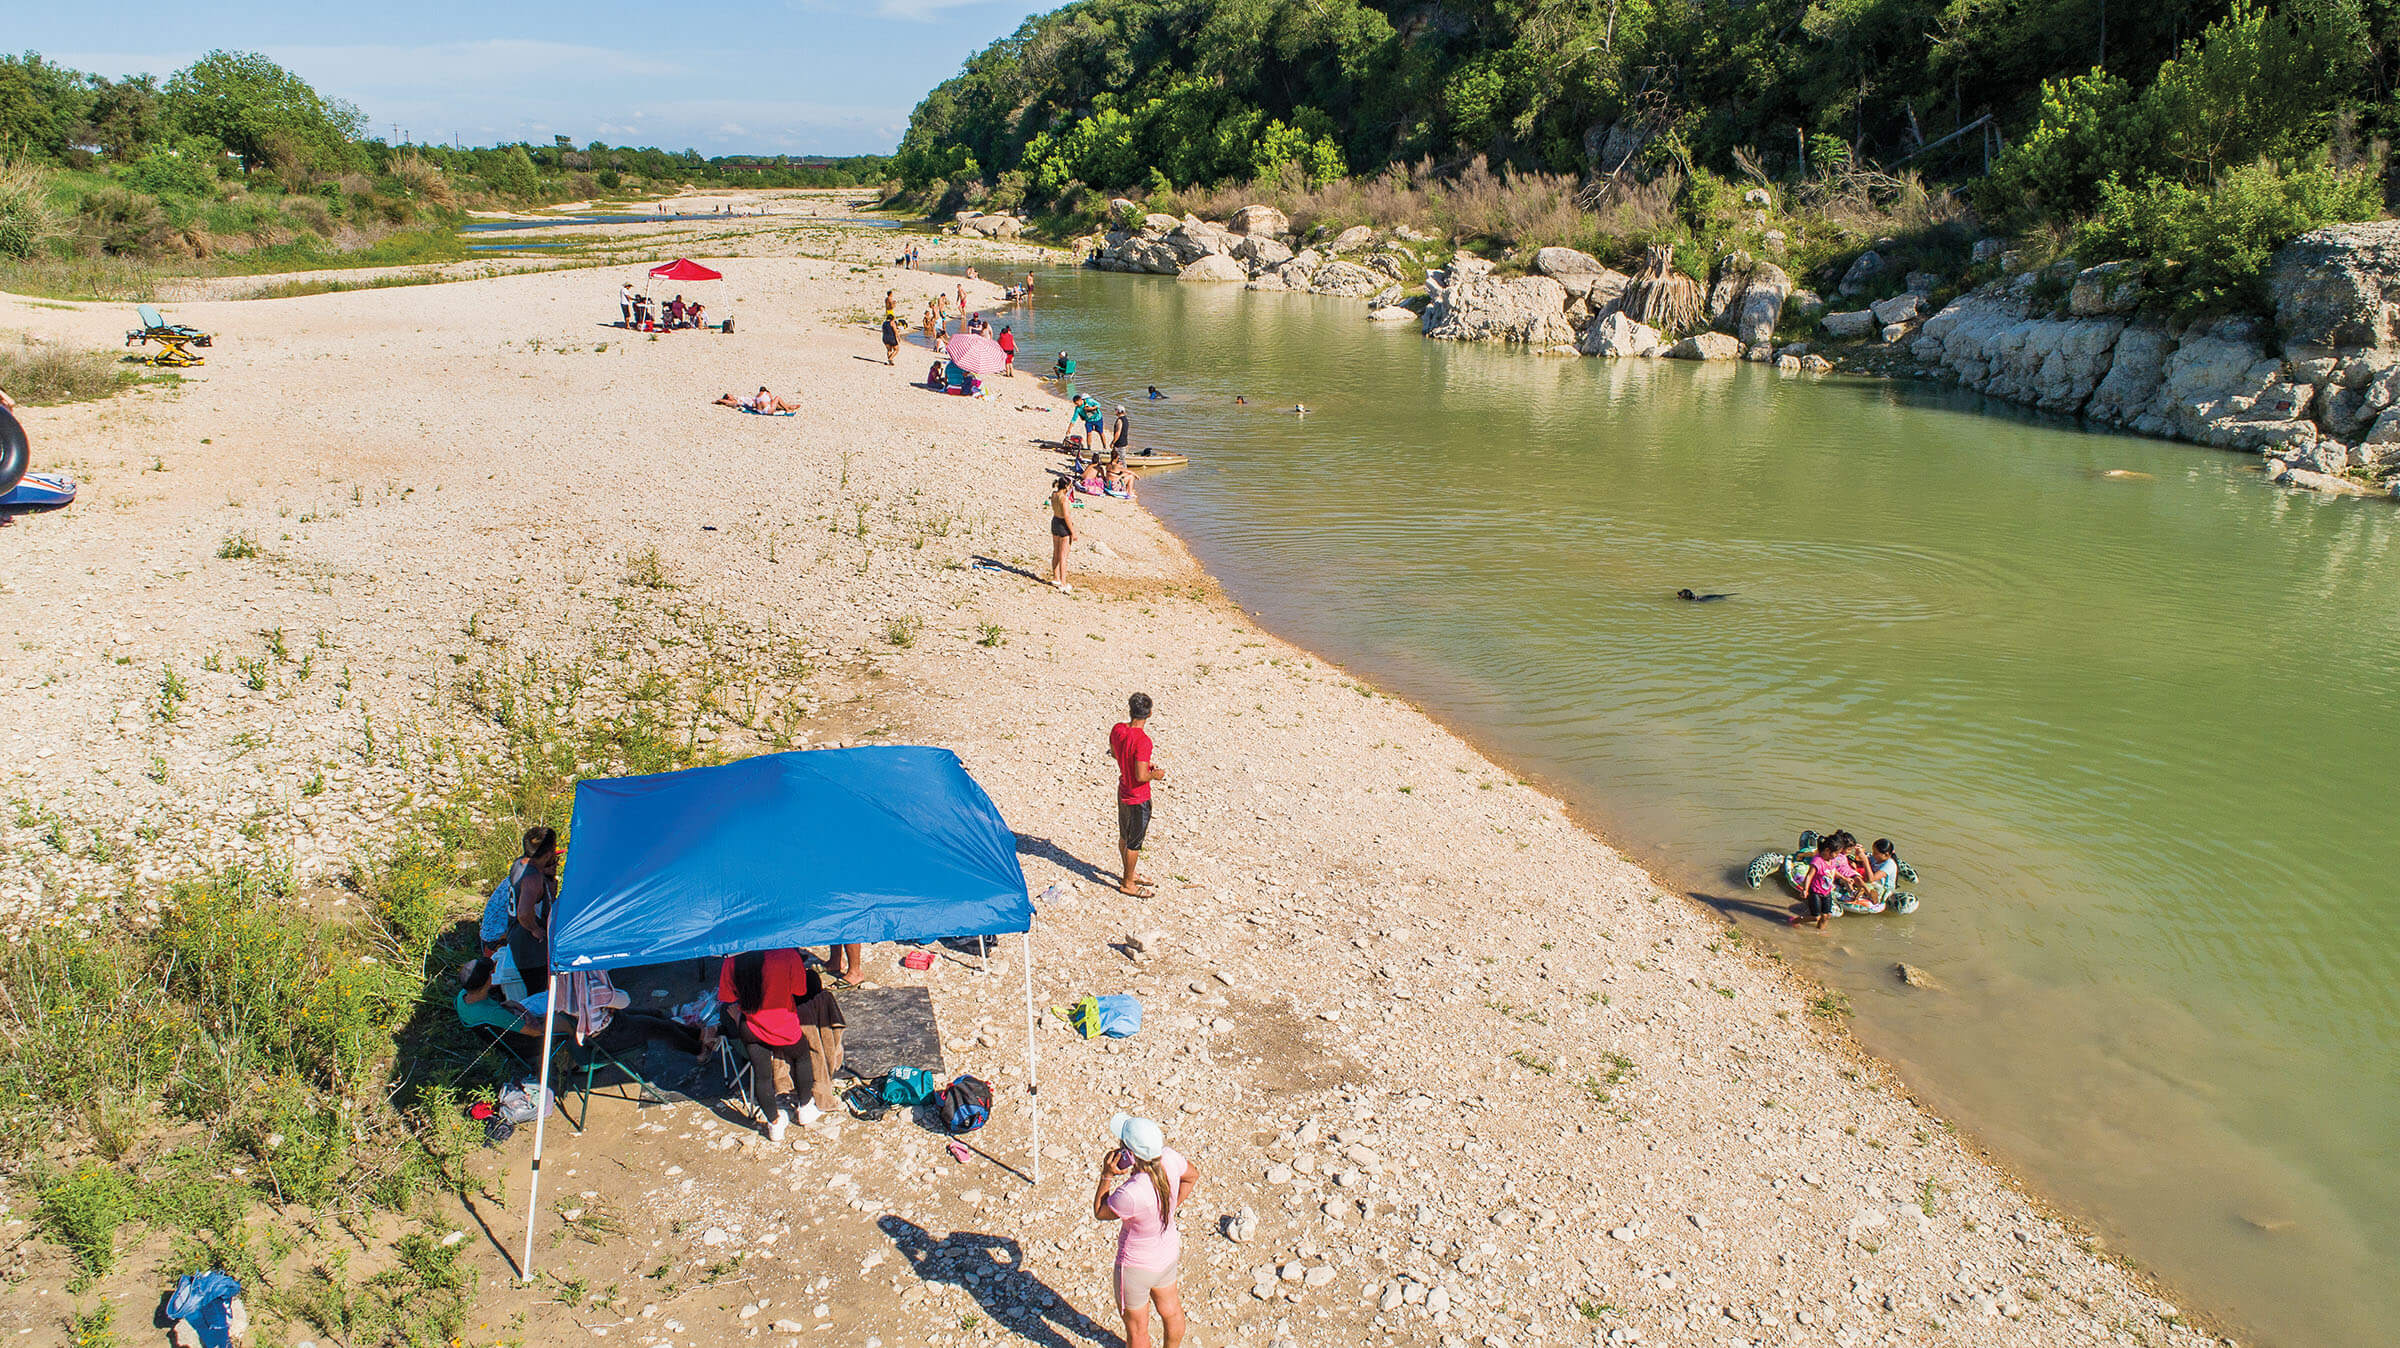 Groups of people sit under tents or in the sun along the banks of a blue-green river